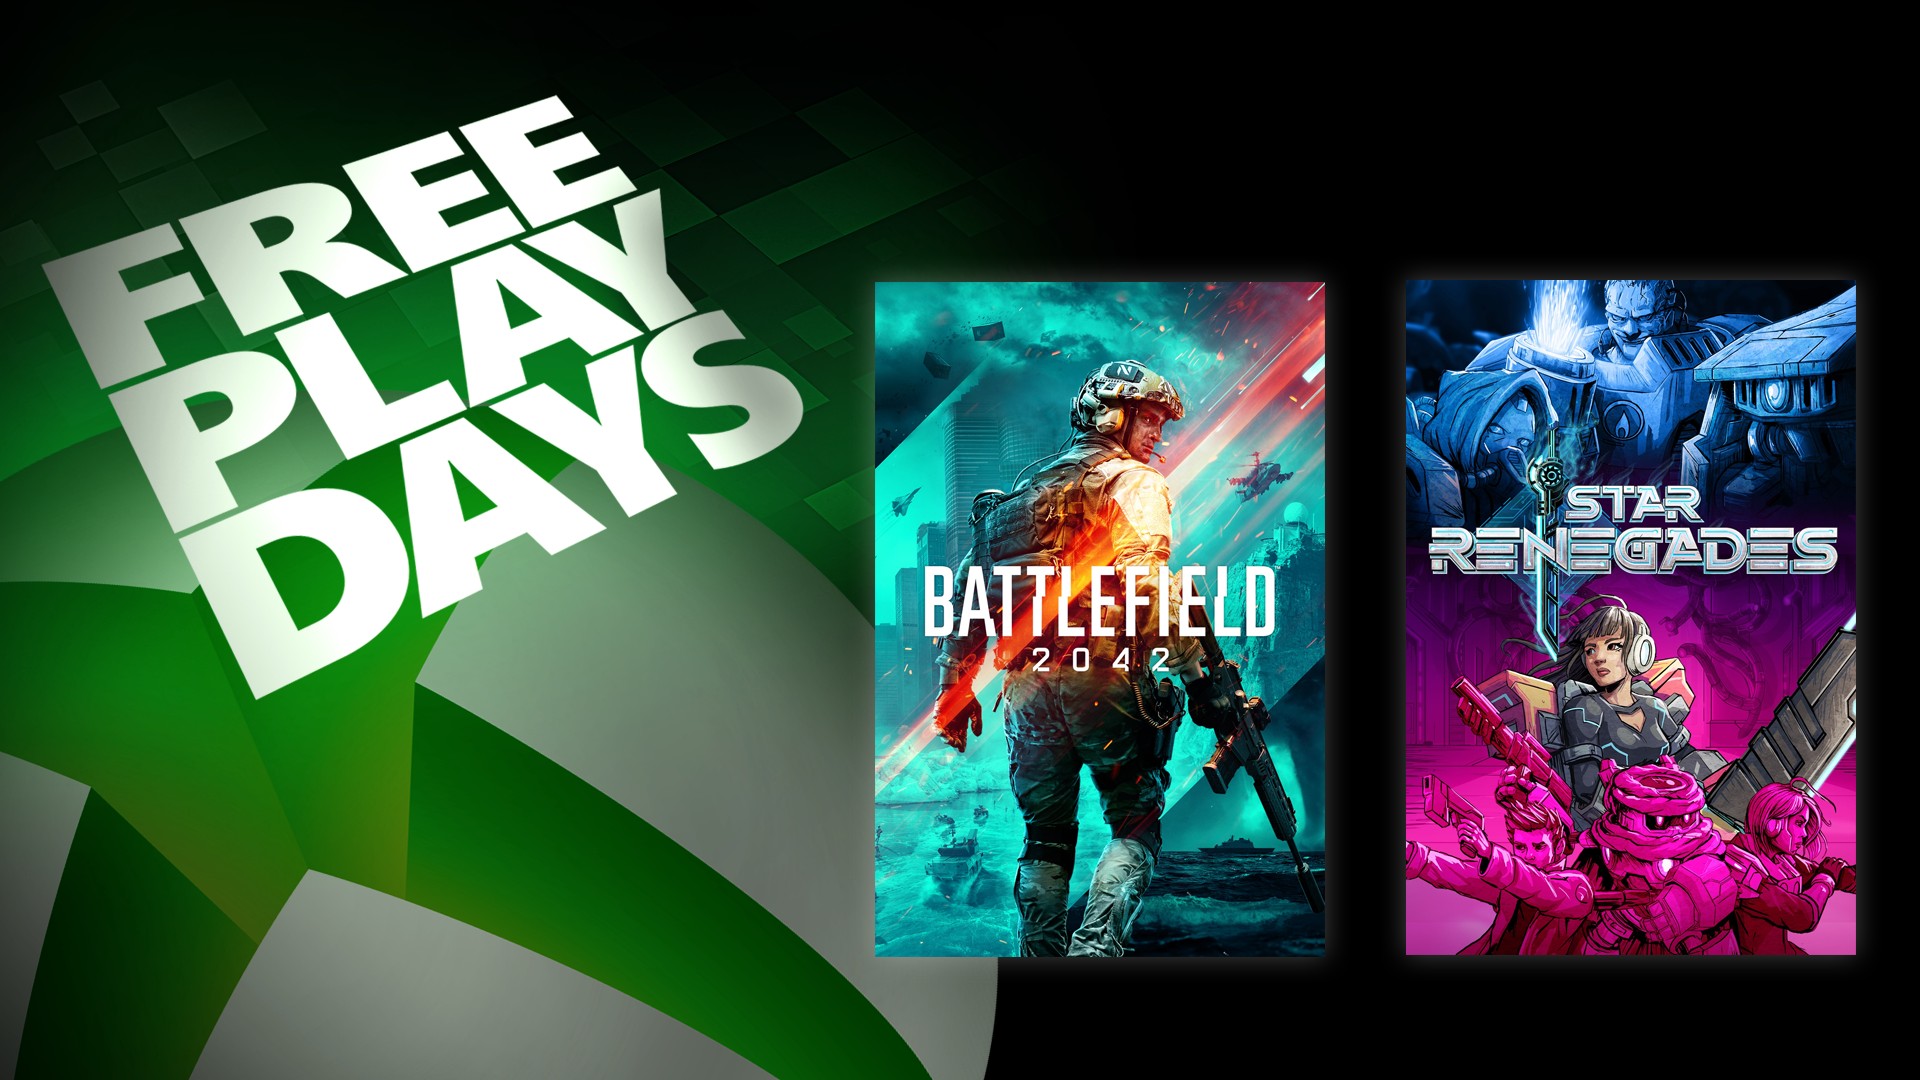 Updated Free Play Days Battlefield 2042 and Star Renegades Xbox Wire